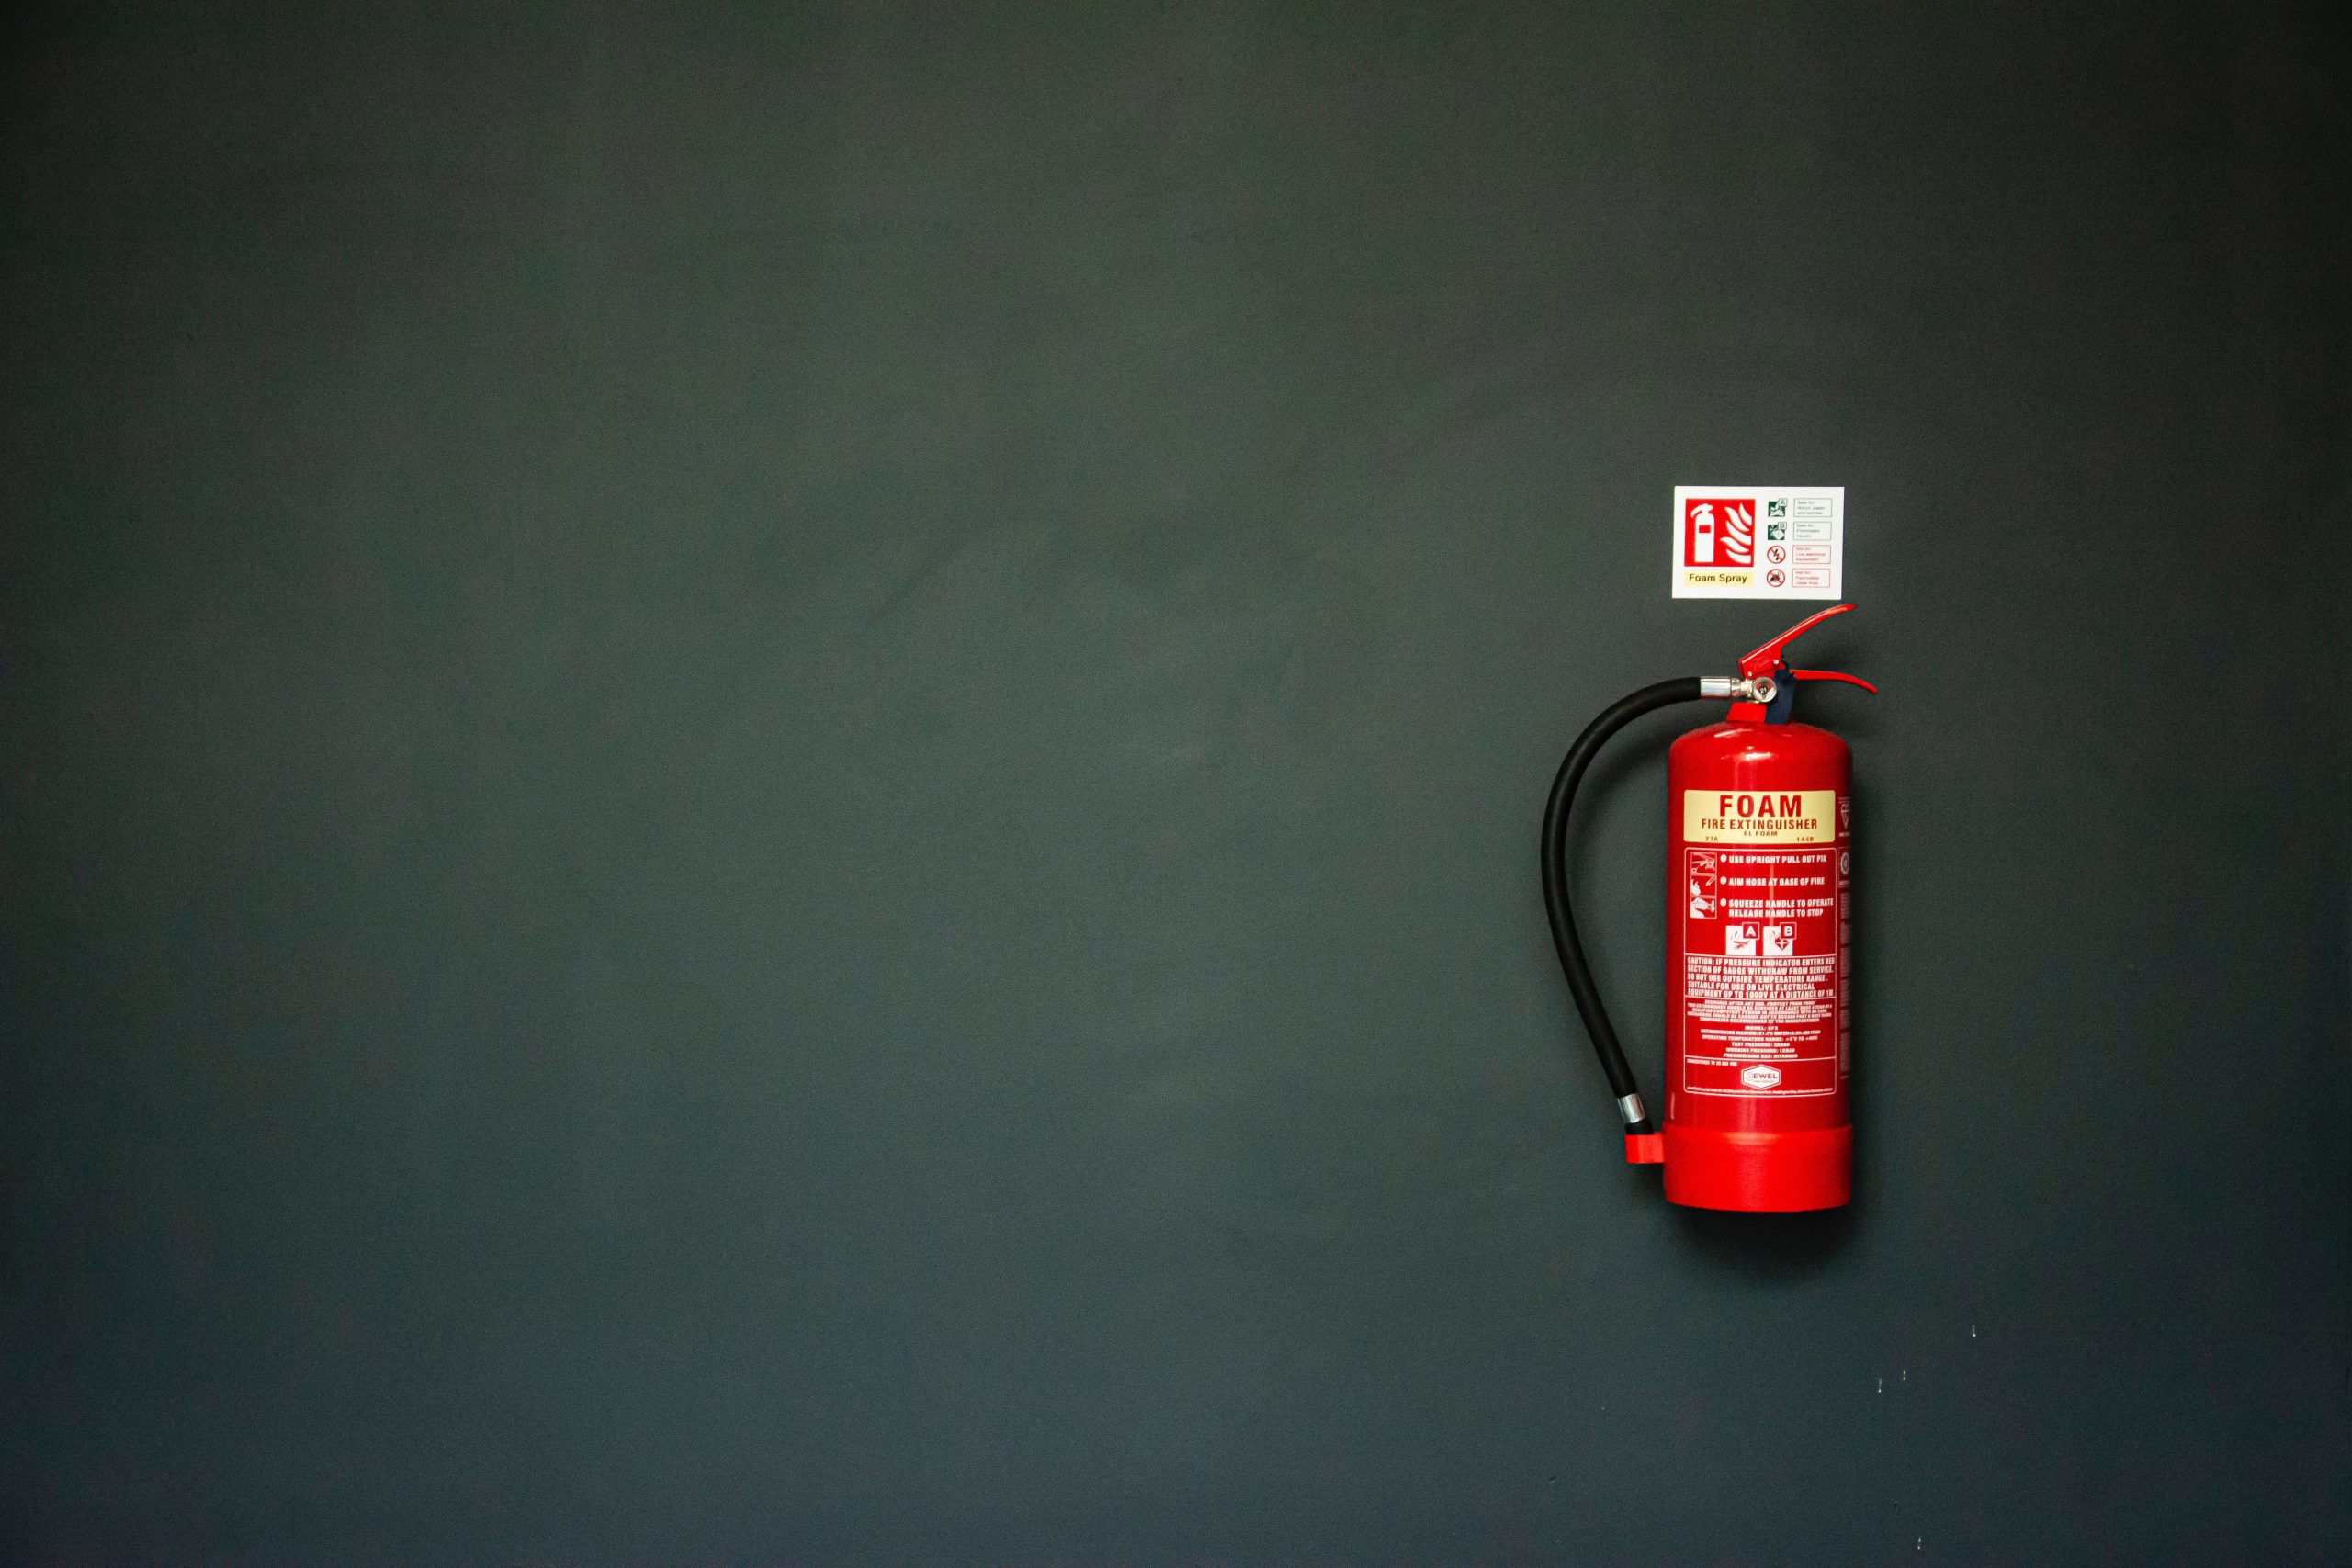 The Best Housewarming Gift You Can Give Today Is a Fire Extinguisher